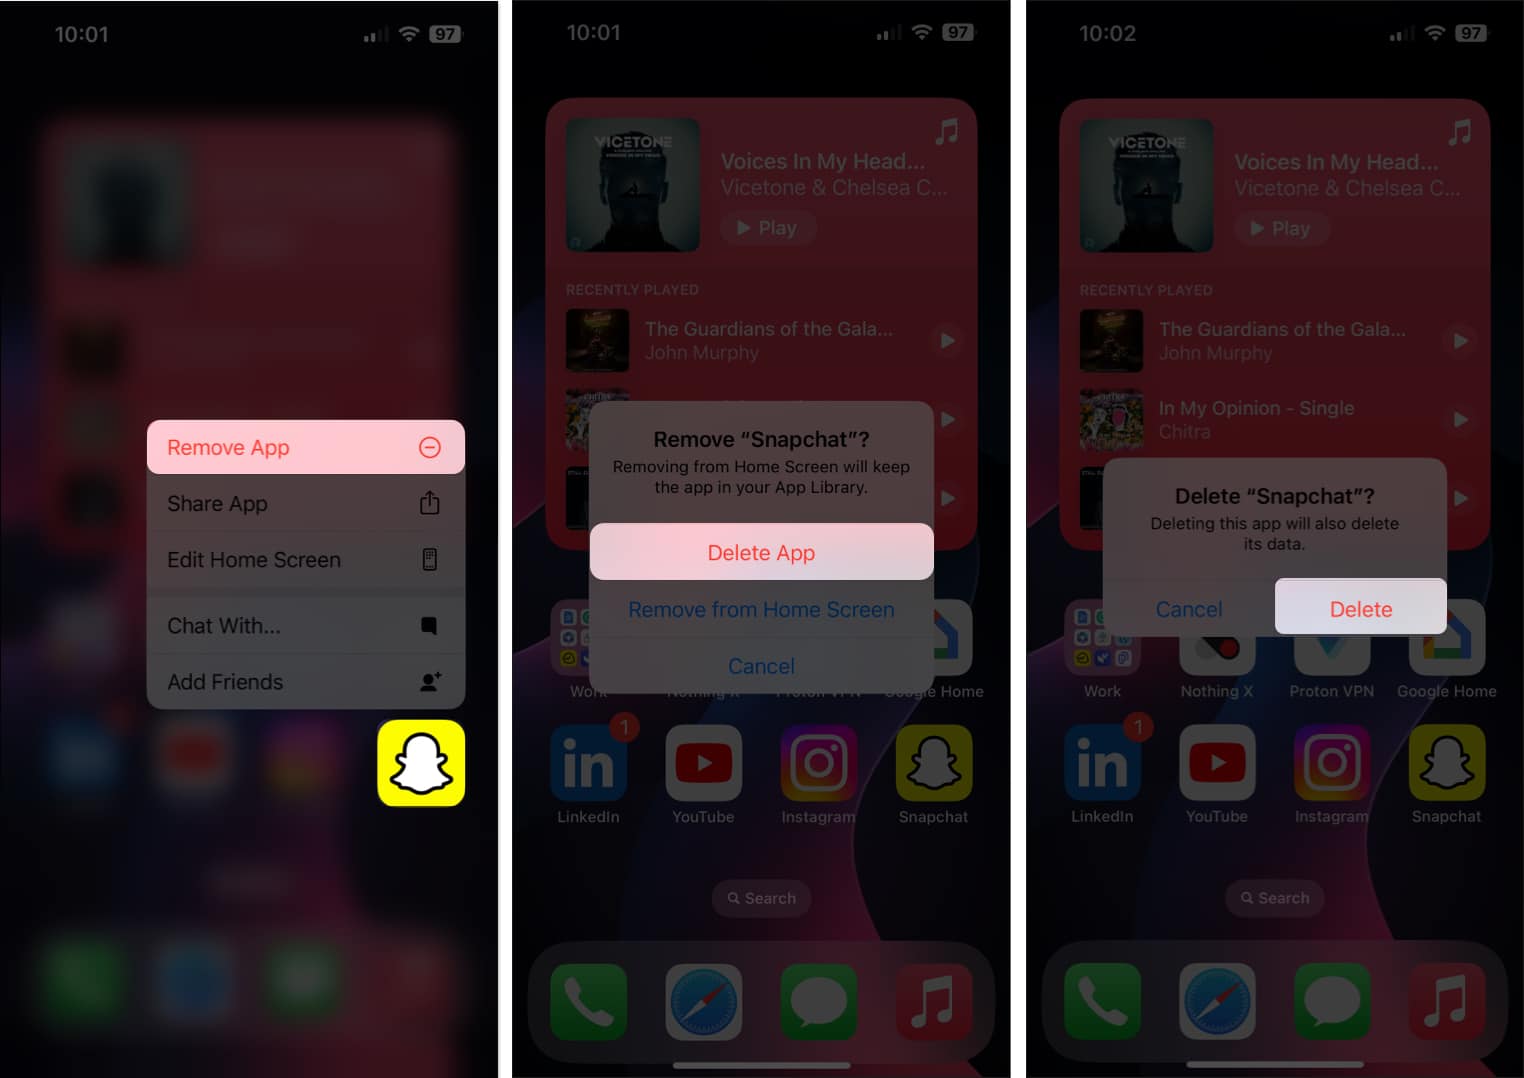 Delete Snapchat App from your iPhone